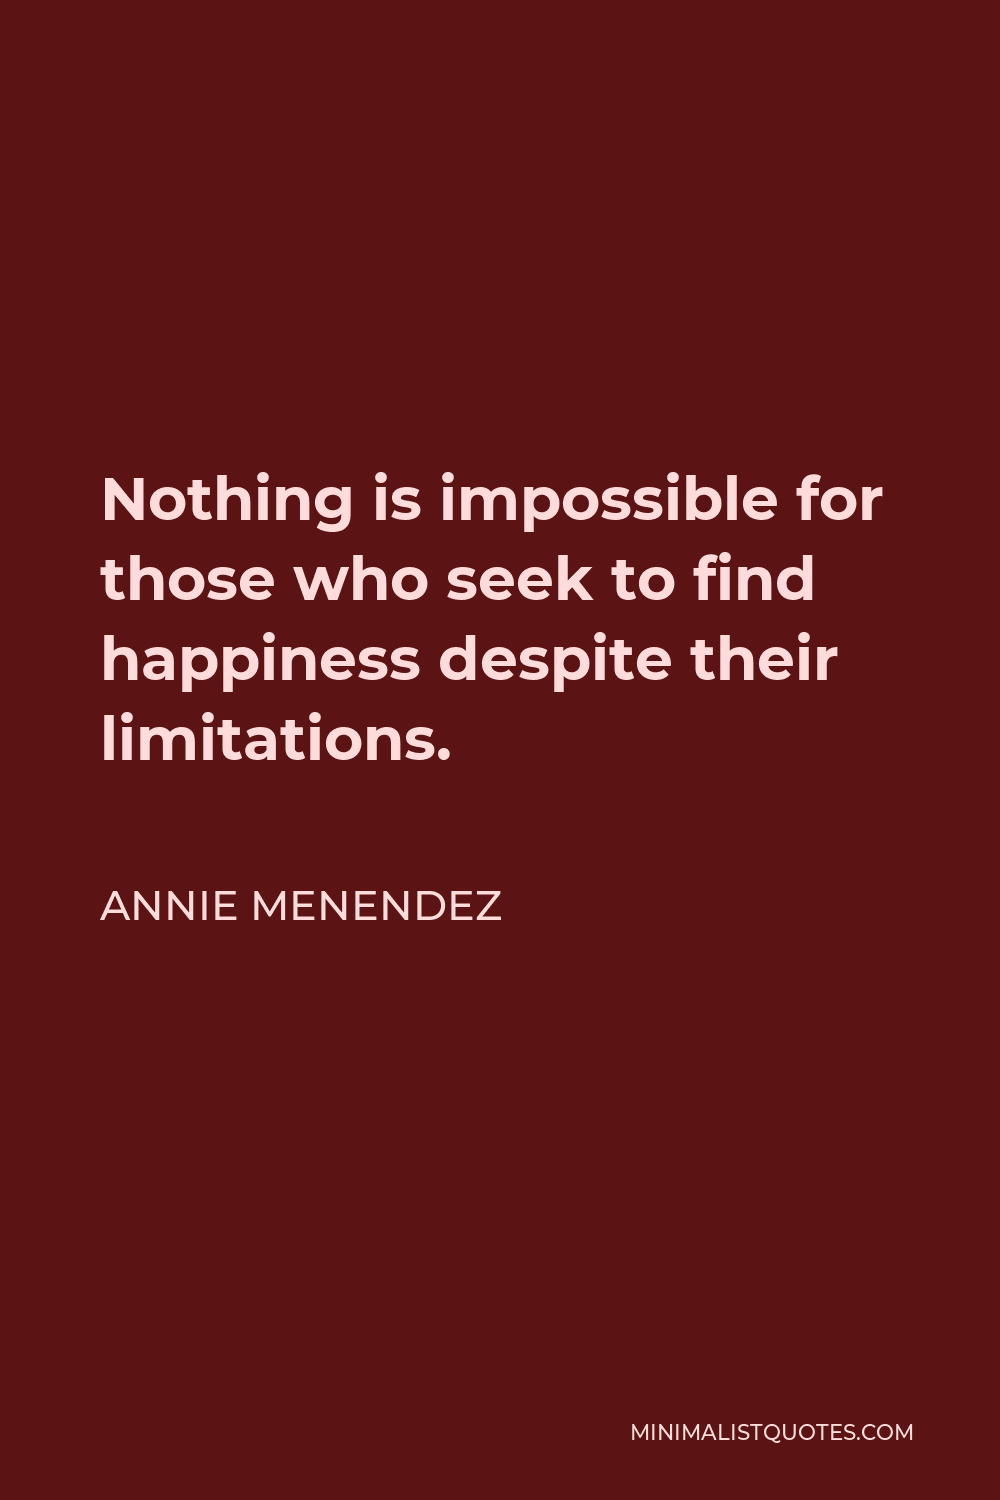 Annie Menendez Quote - Nothing is impossible for those who seek to find happiness despite their limitations.